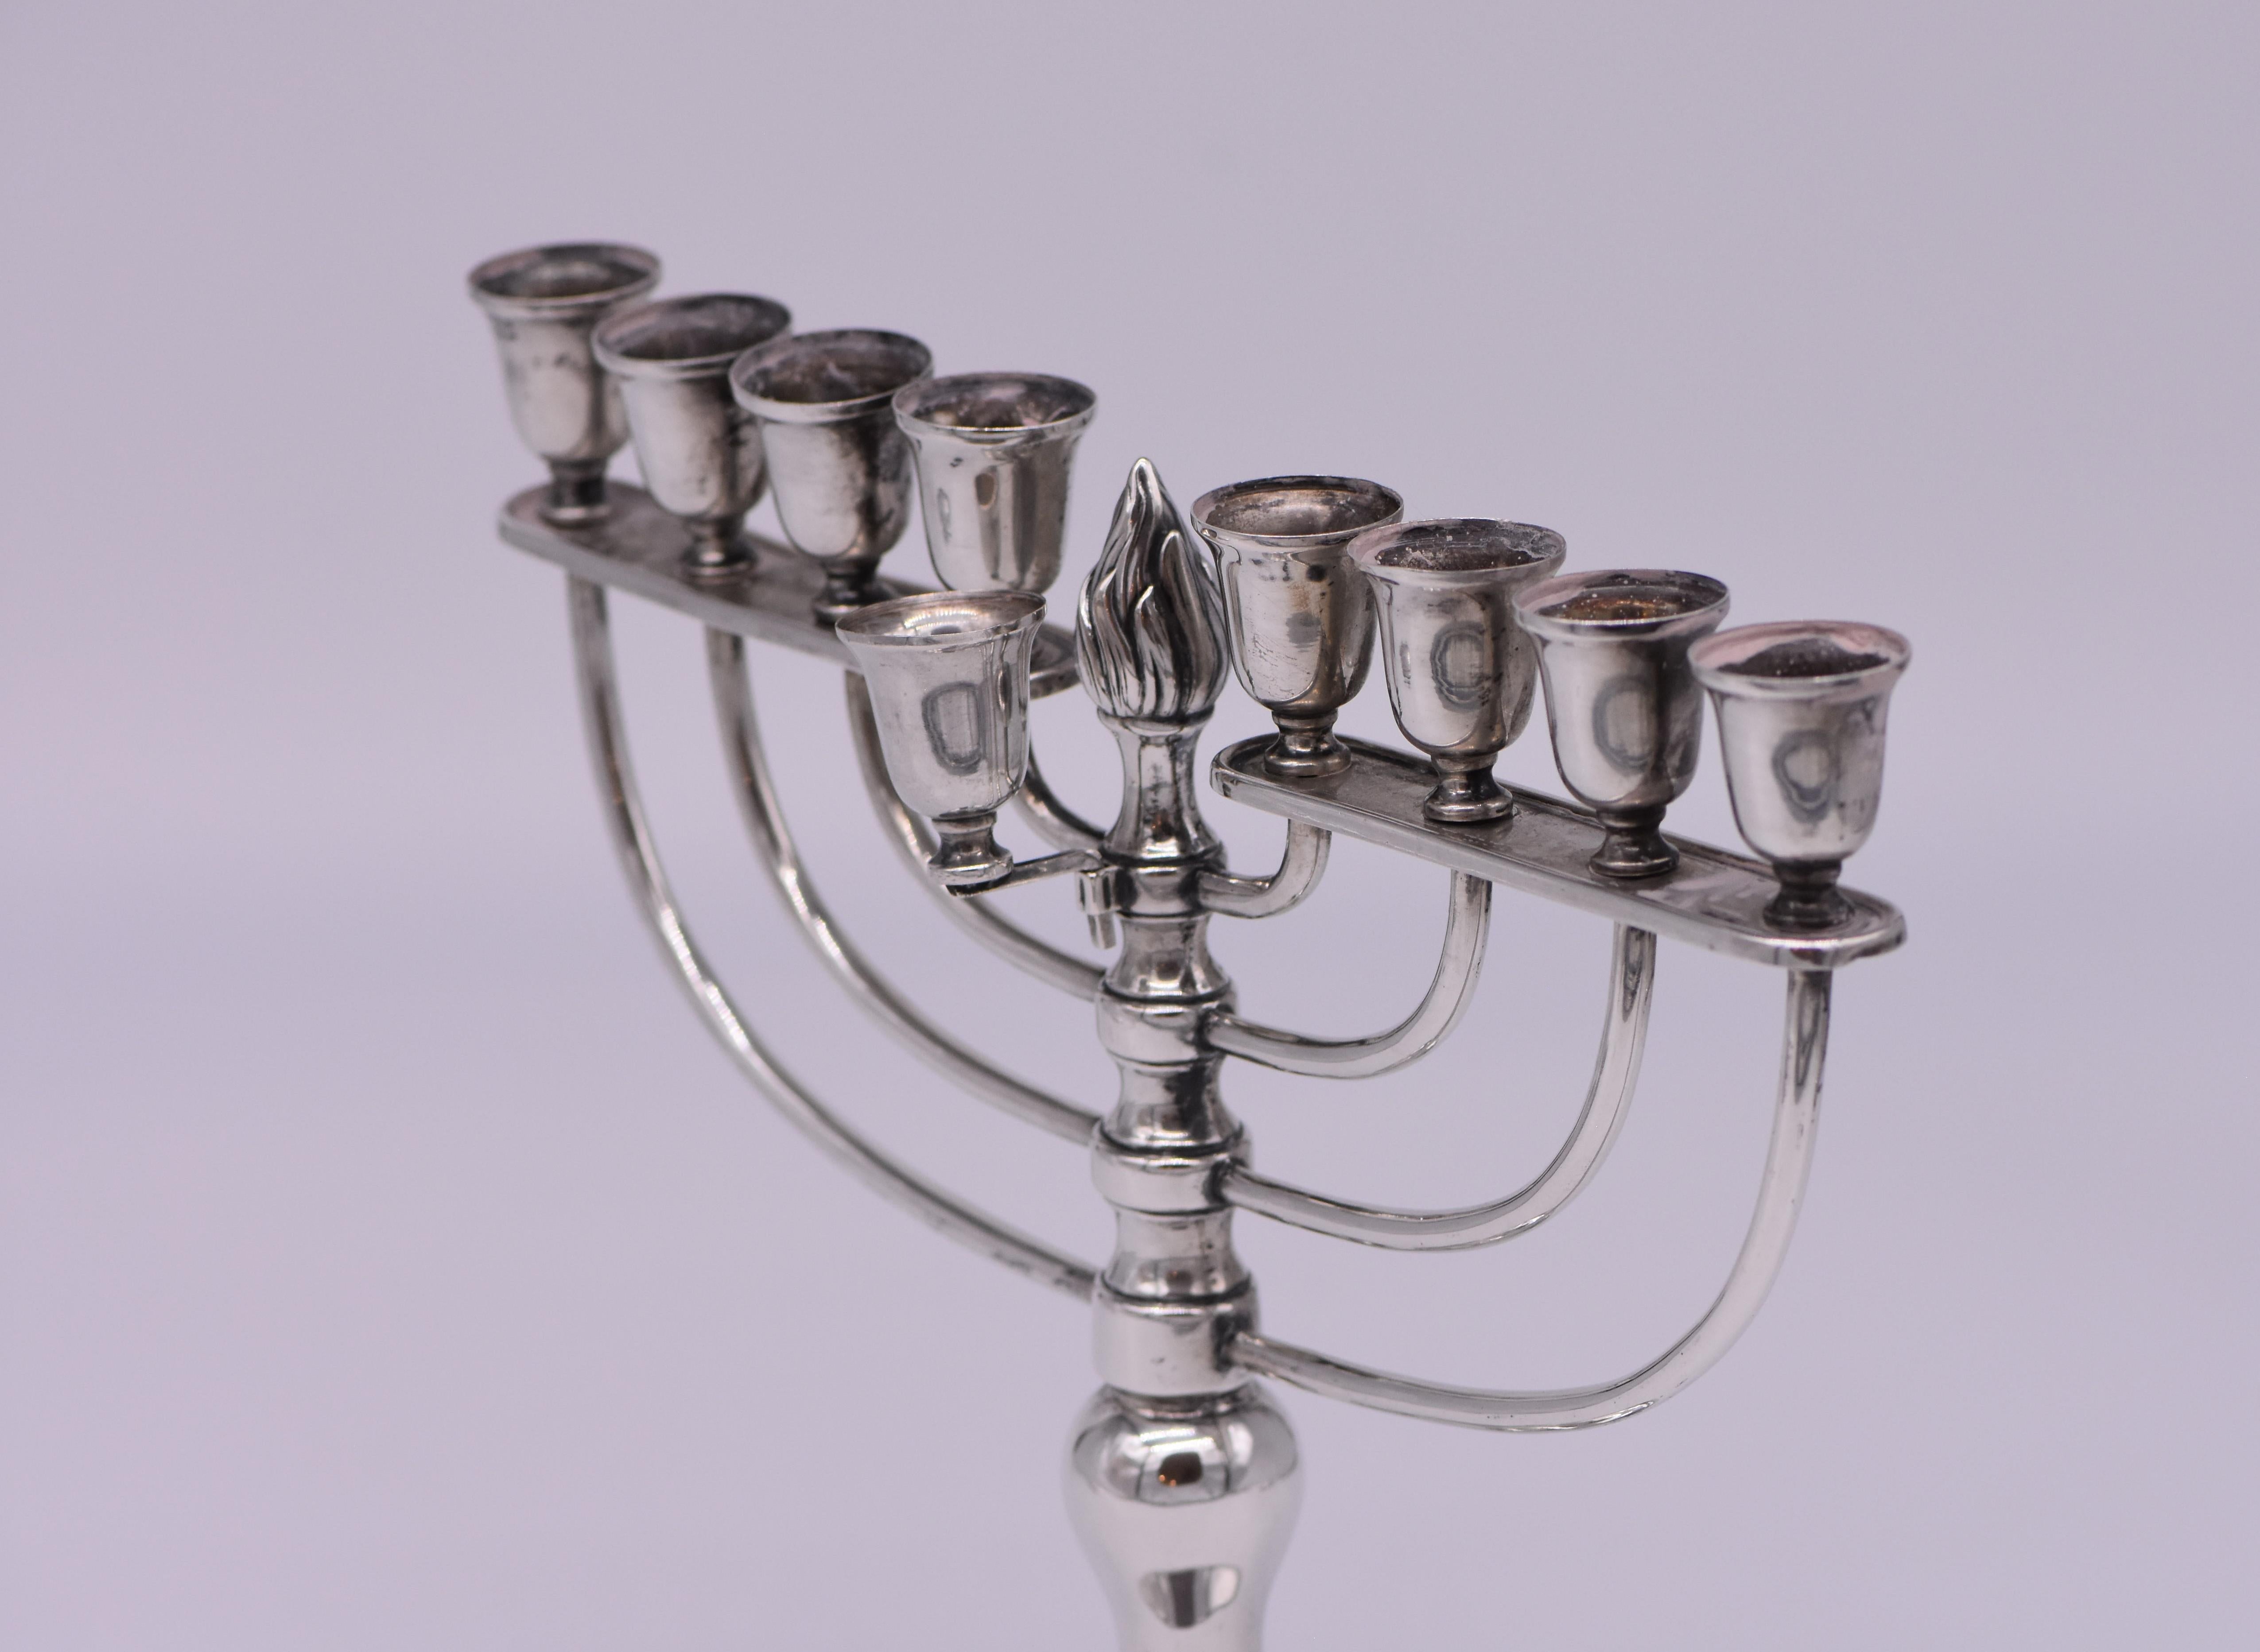 On round decorated base with baluster shape stem. 
The upper portion constructed with eight semicircle arms and original servant light.
Topped by a silver flame finial.
Marked with German silver hallmarks.

Every item in Menorah Galleries is